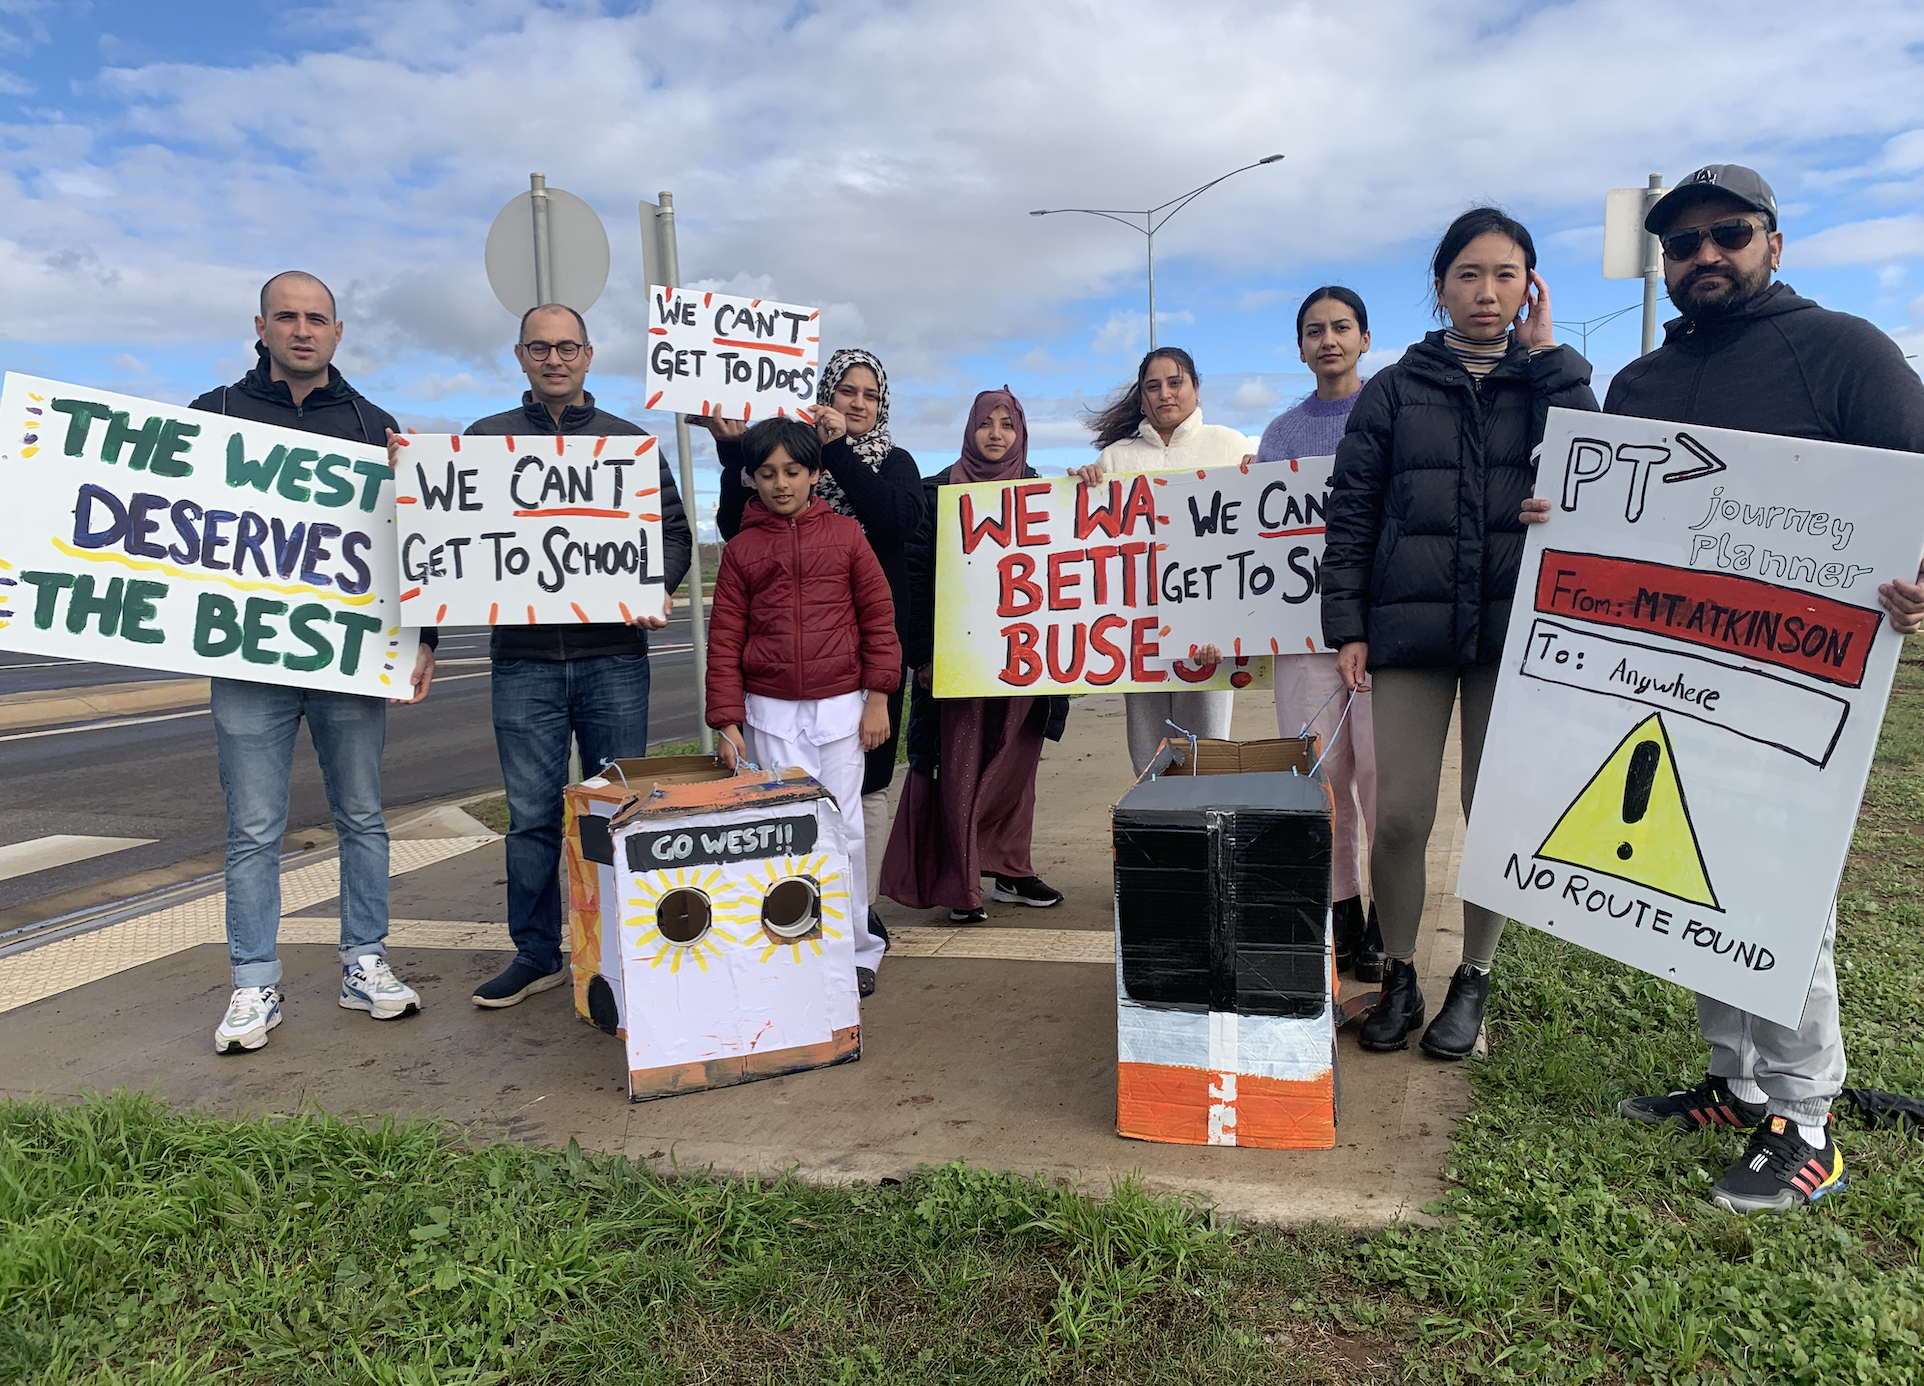 Image of community members from Mt.Atkinson holding signs saying 'Better Buses for the West', 'We can't get to school', 'We can't get to docs', 'We want Better Buses', 'We can't get to shops' and 'PTV journey planner from Mt. Atkinson to Anywhere'